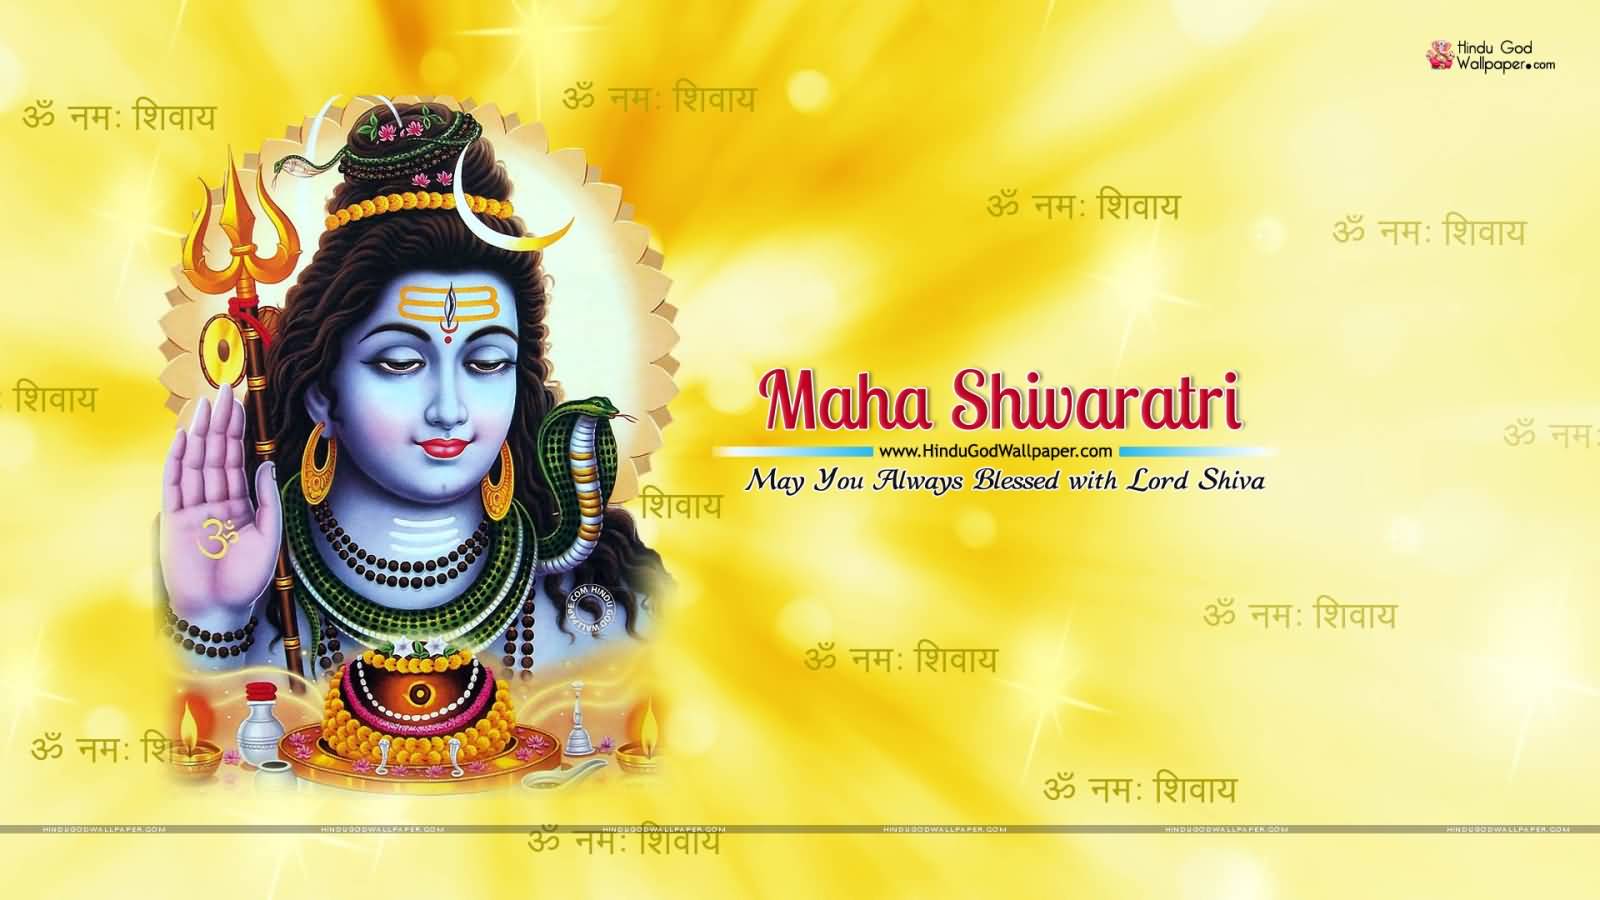 Maha Shivratri May You Always Blessed With Lord Shiva Greeting Card